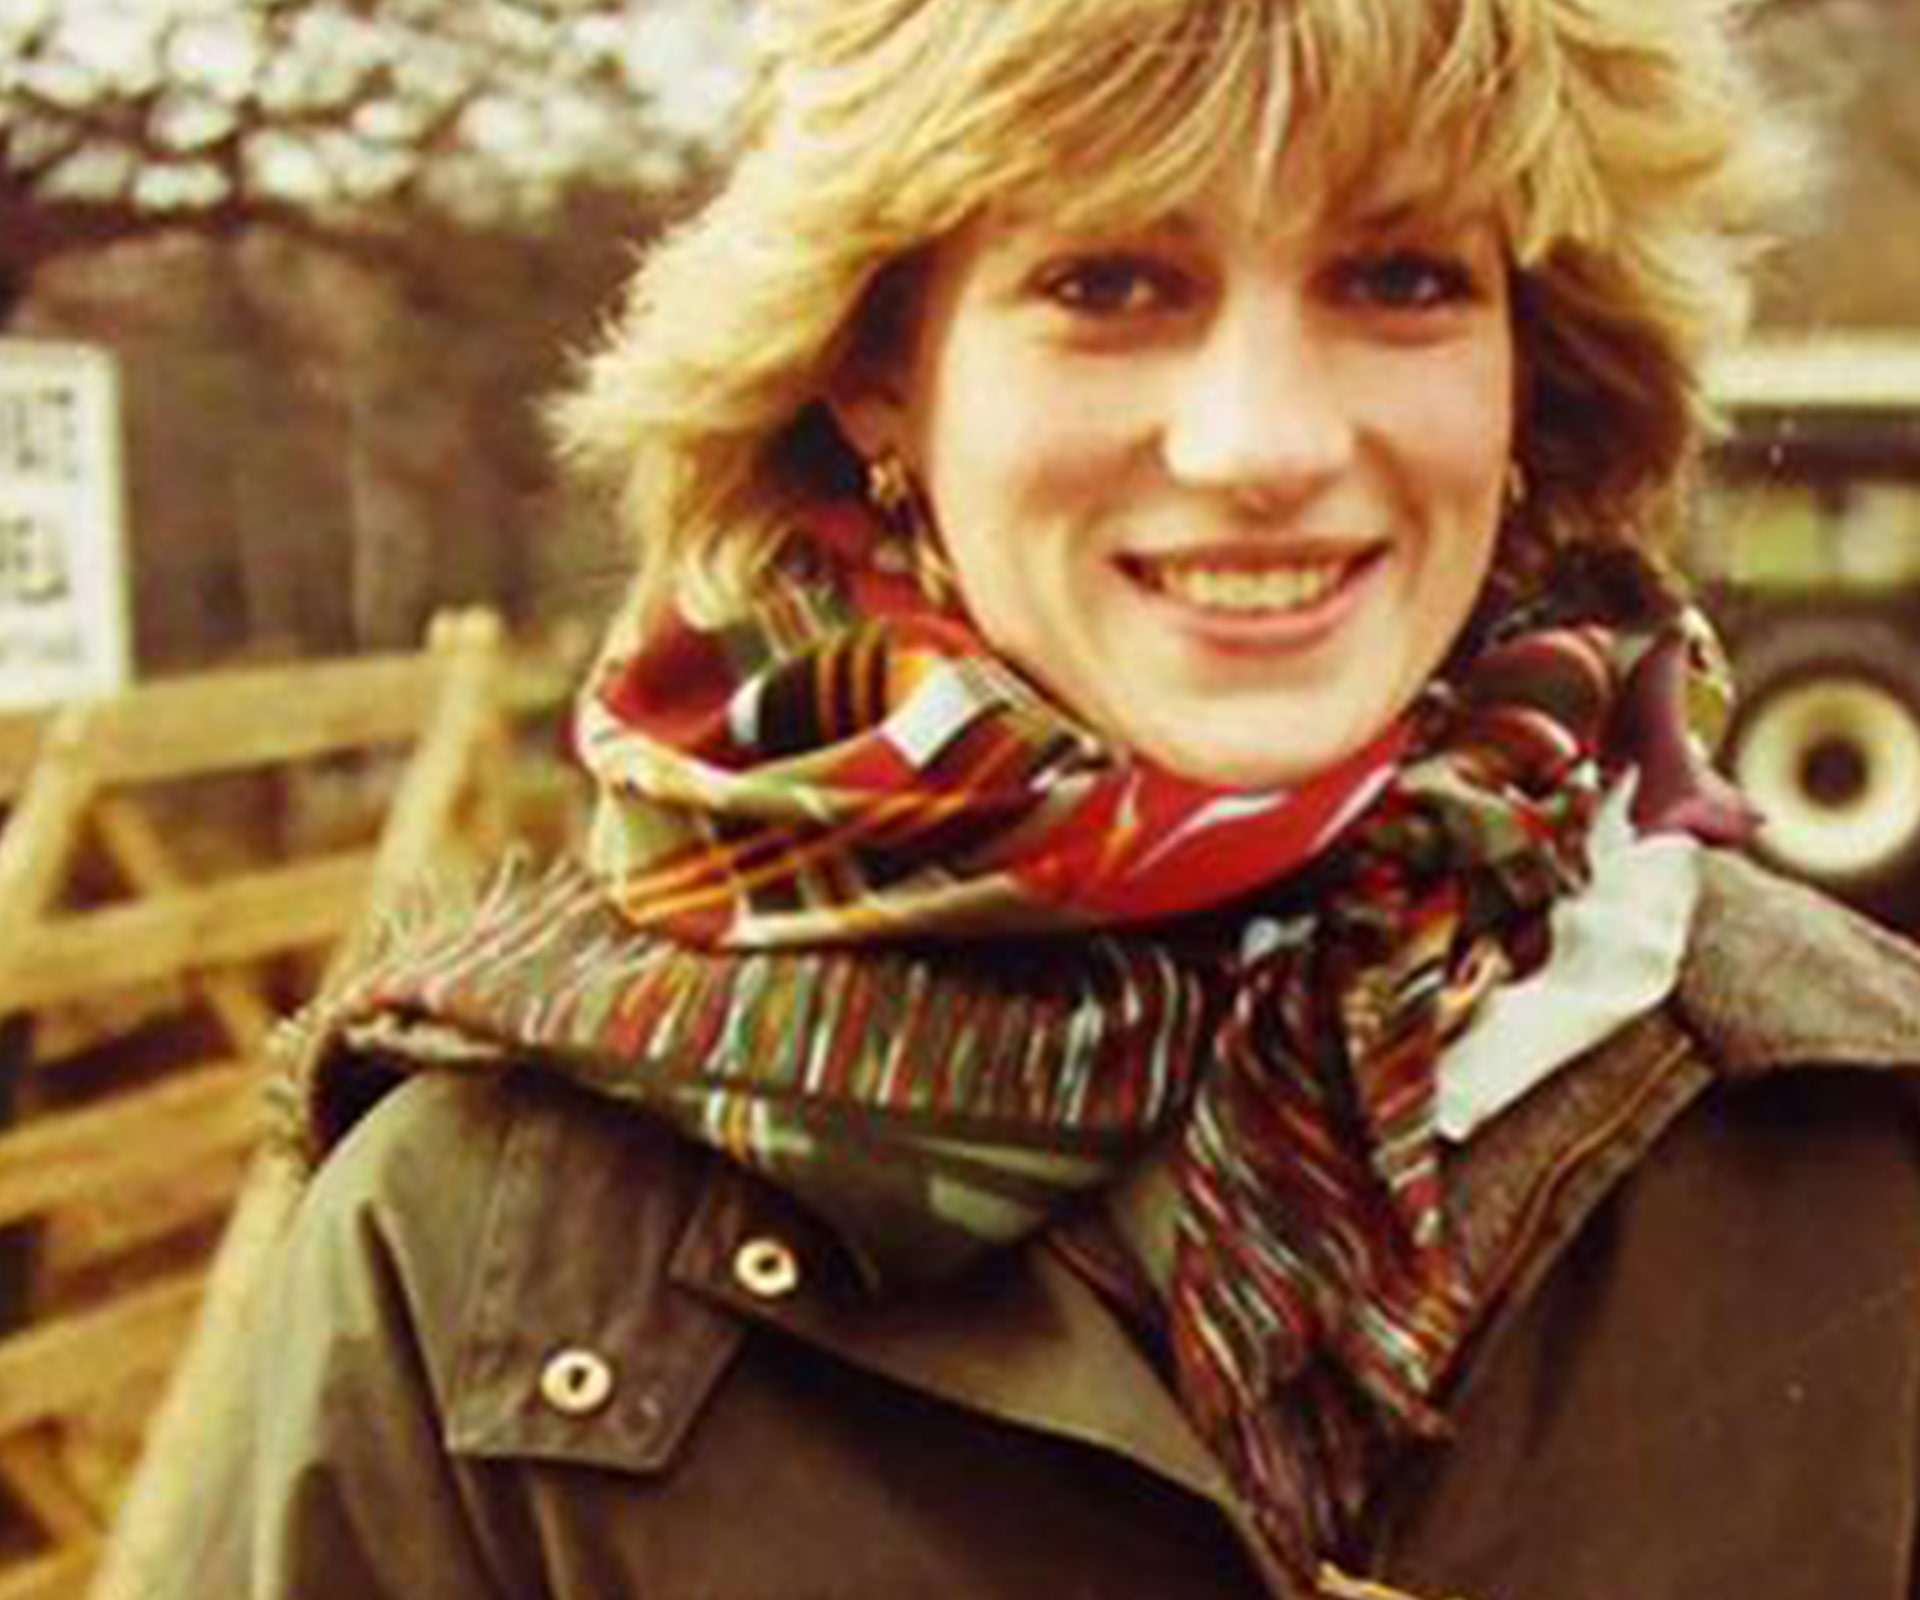 A rare look at the early years of Princess Diana